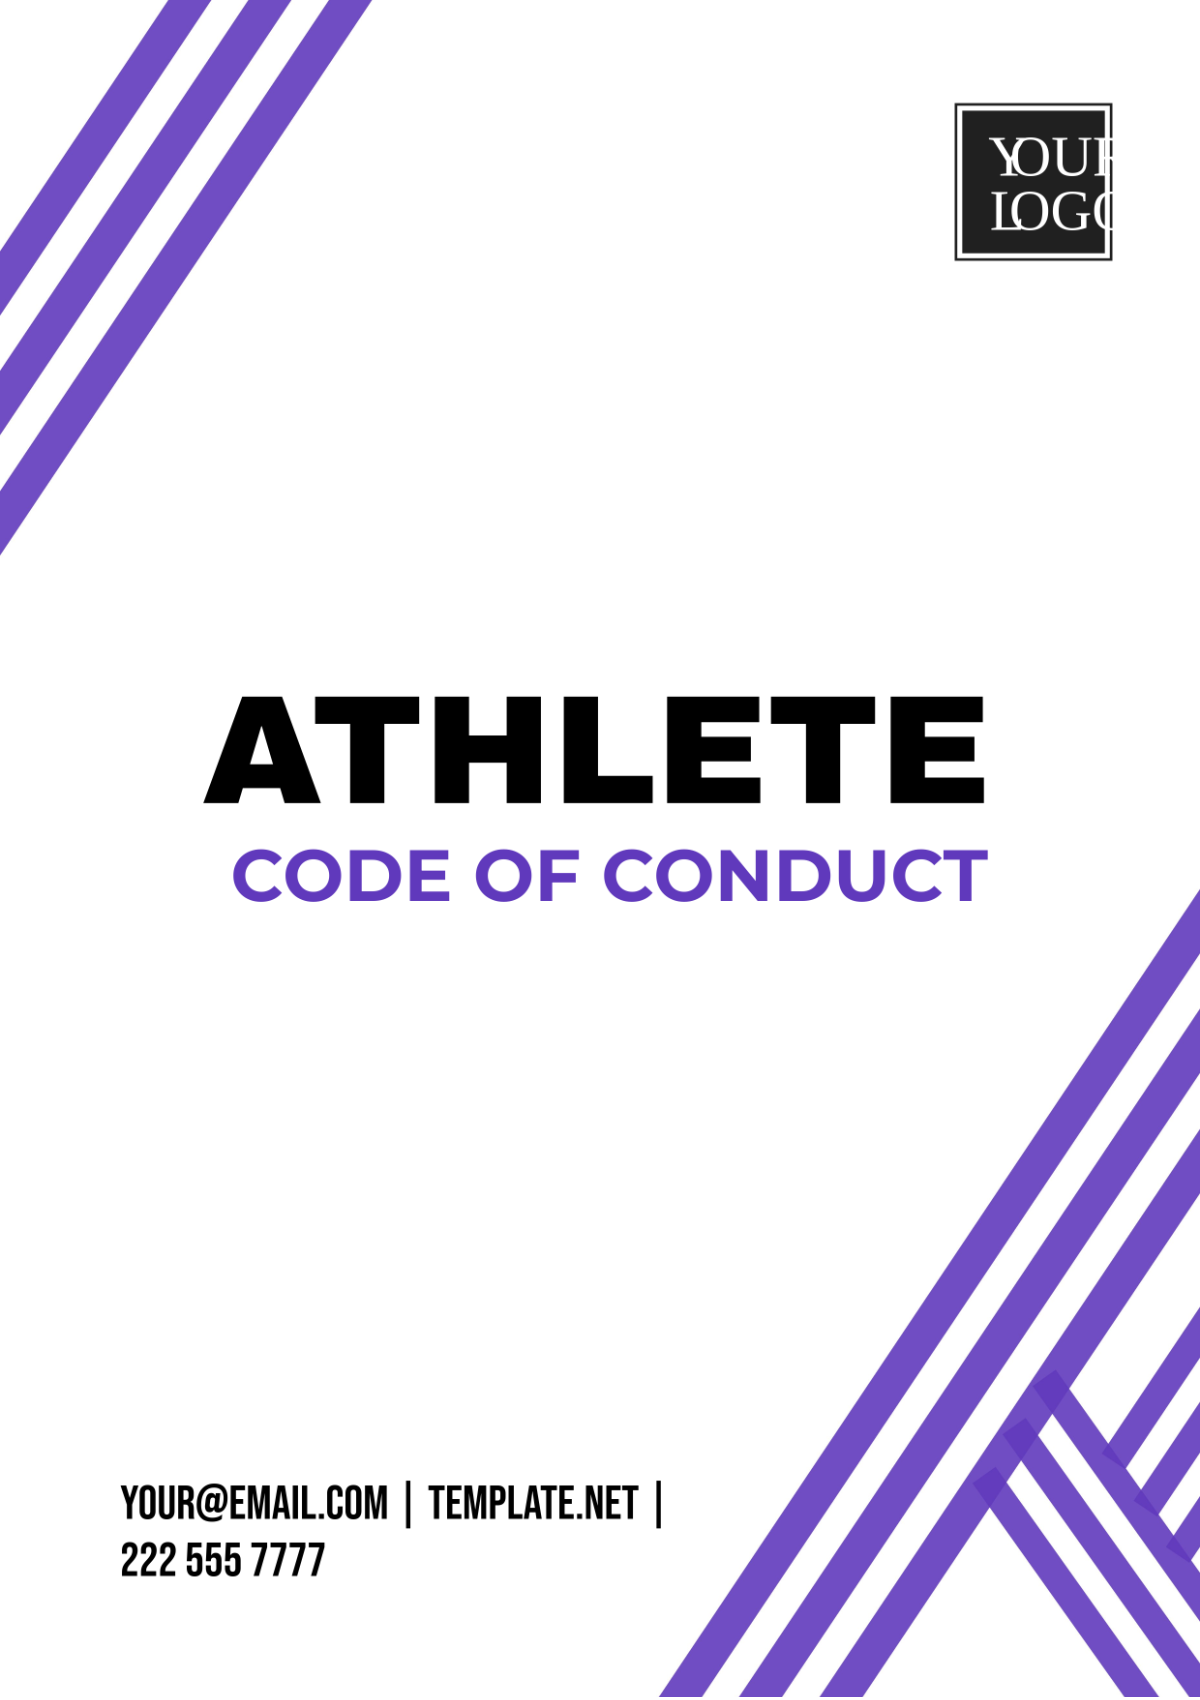 Athlete Code of Conduct Template